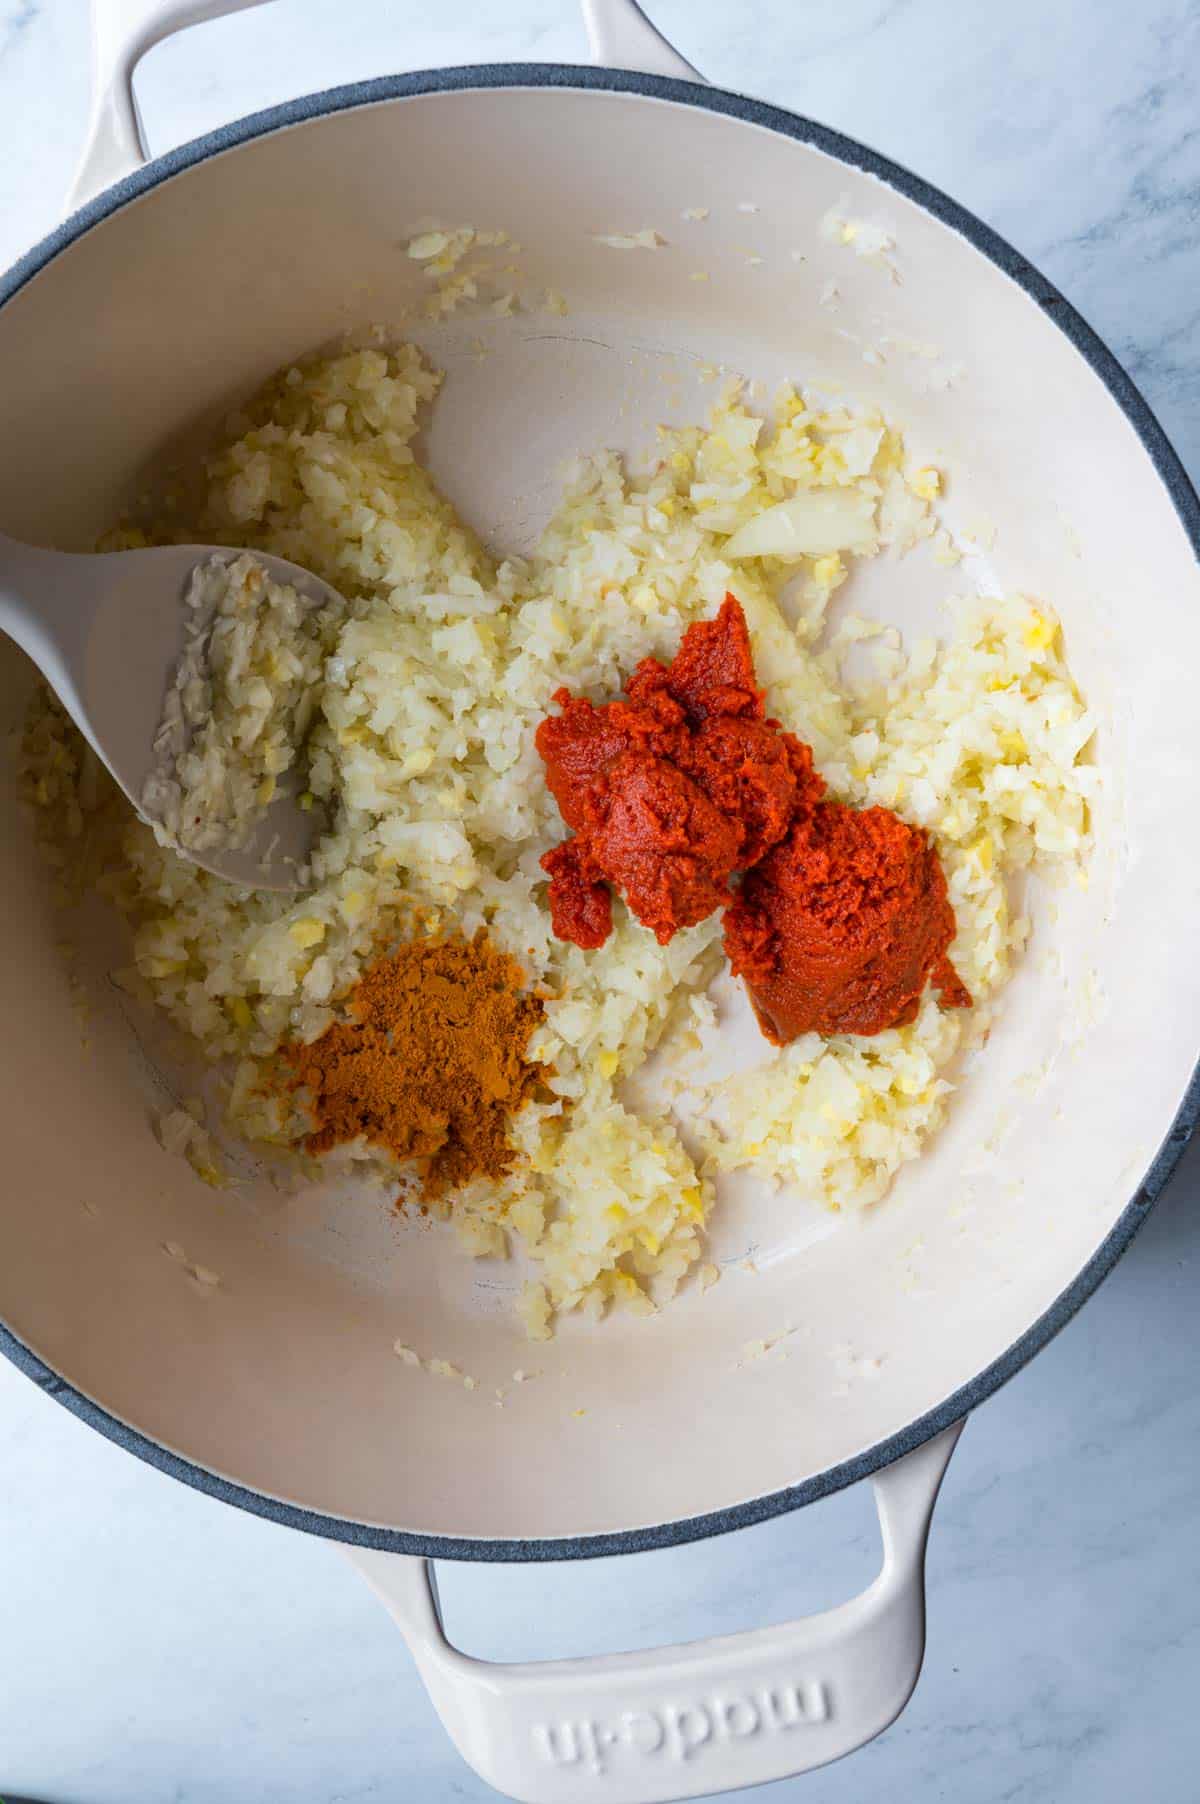 Cooked diced onions, minced garlic and ginger, with red paste and turmeric, in a white skillet with a gray spatula.